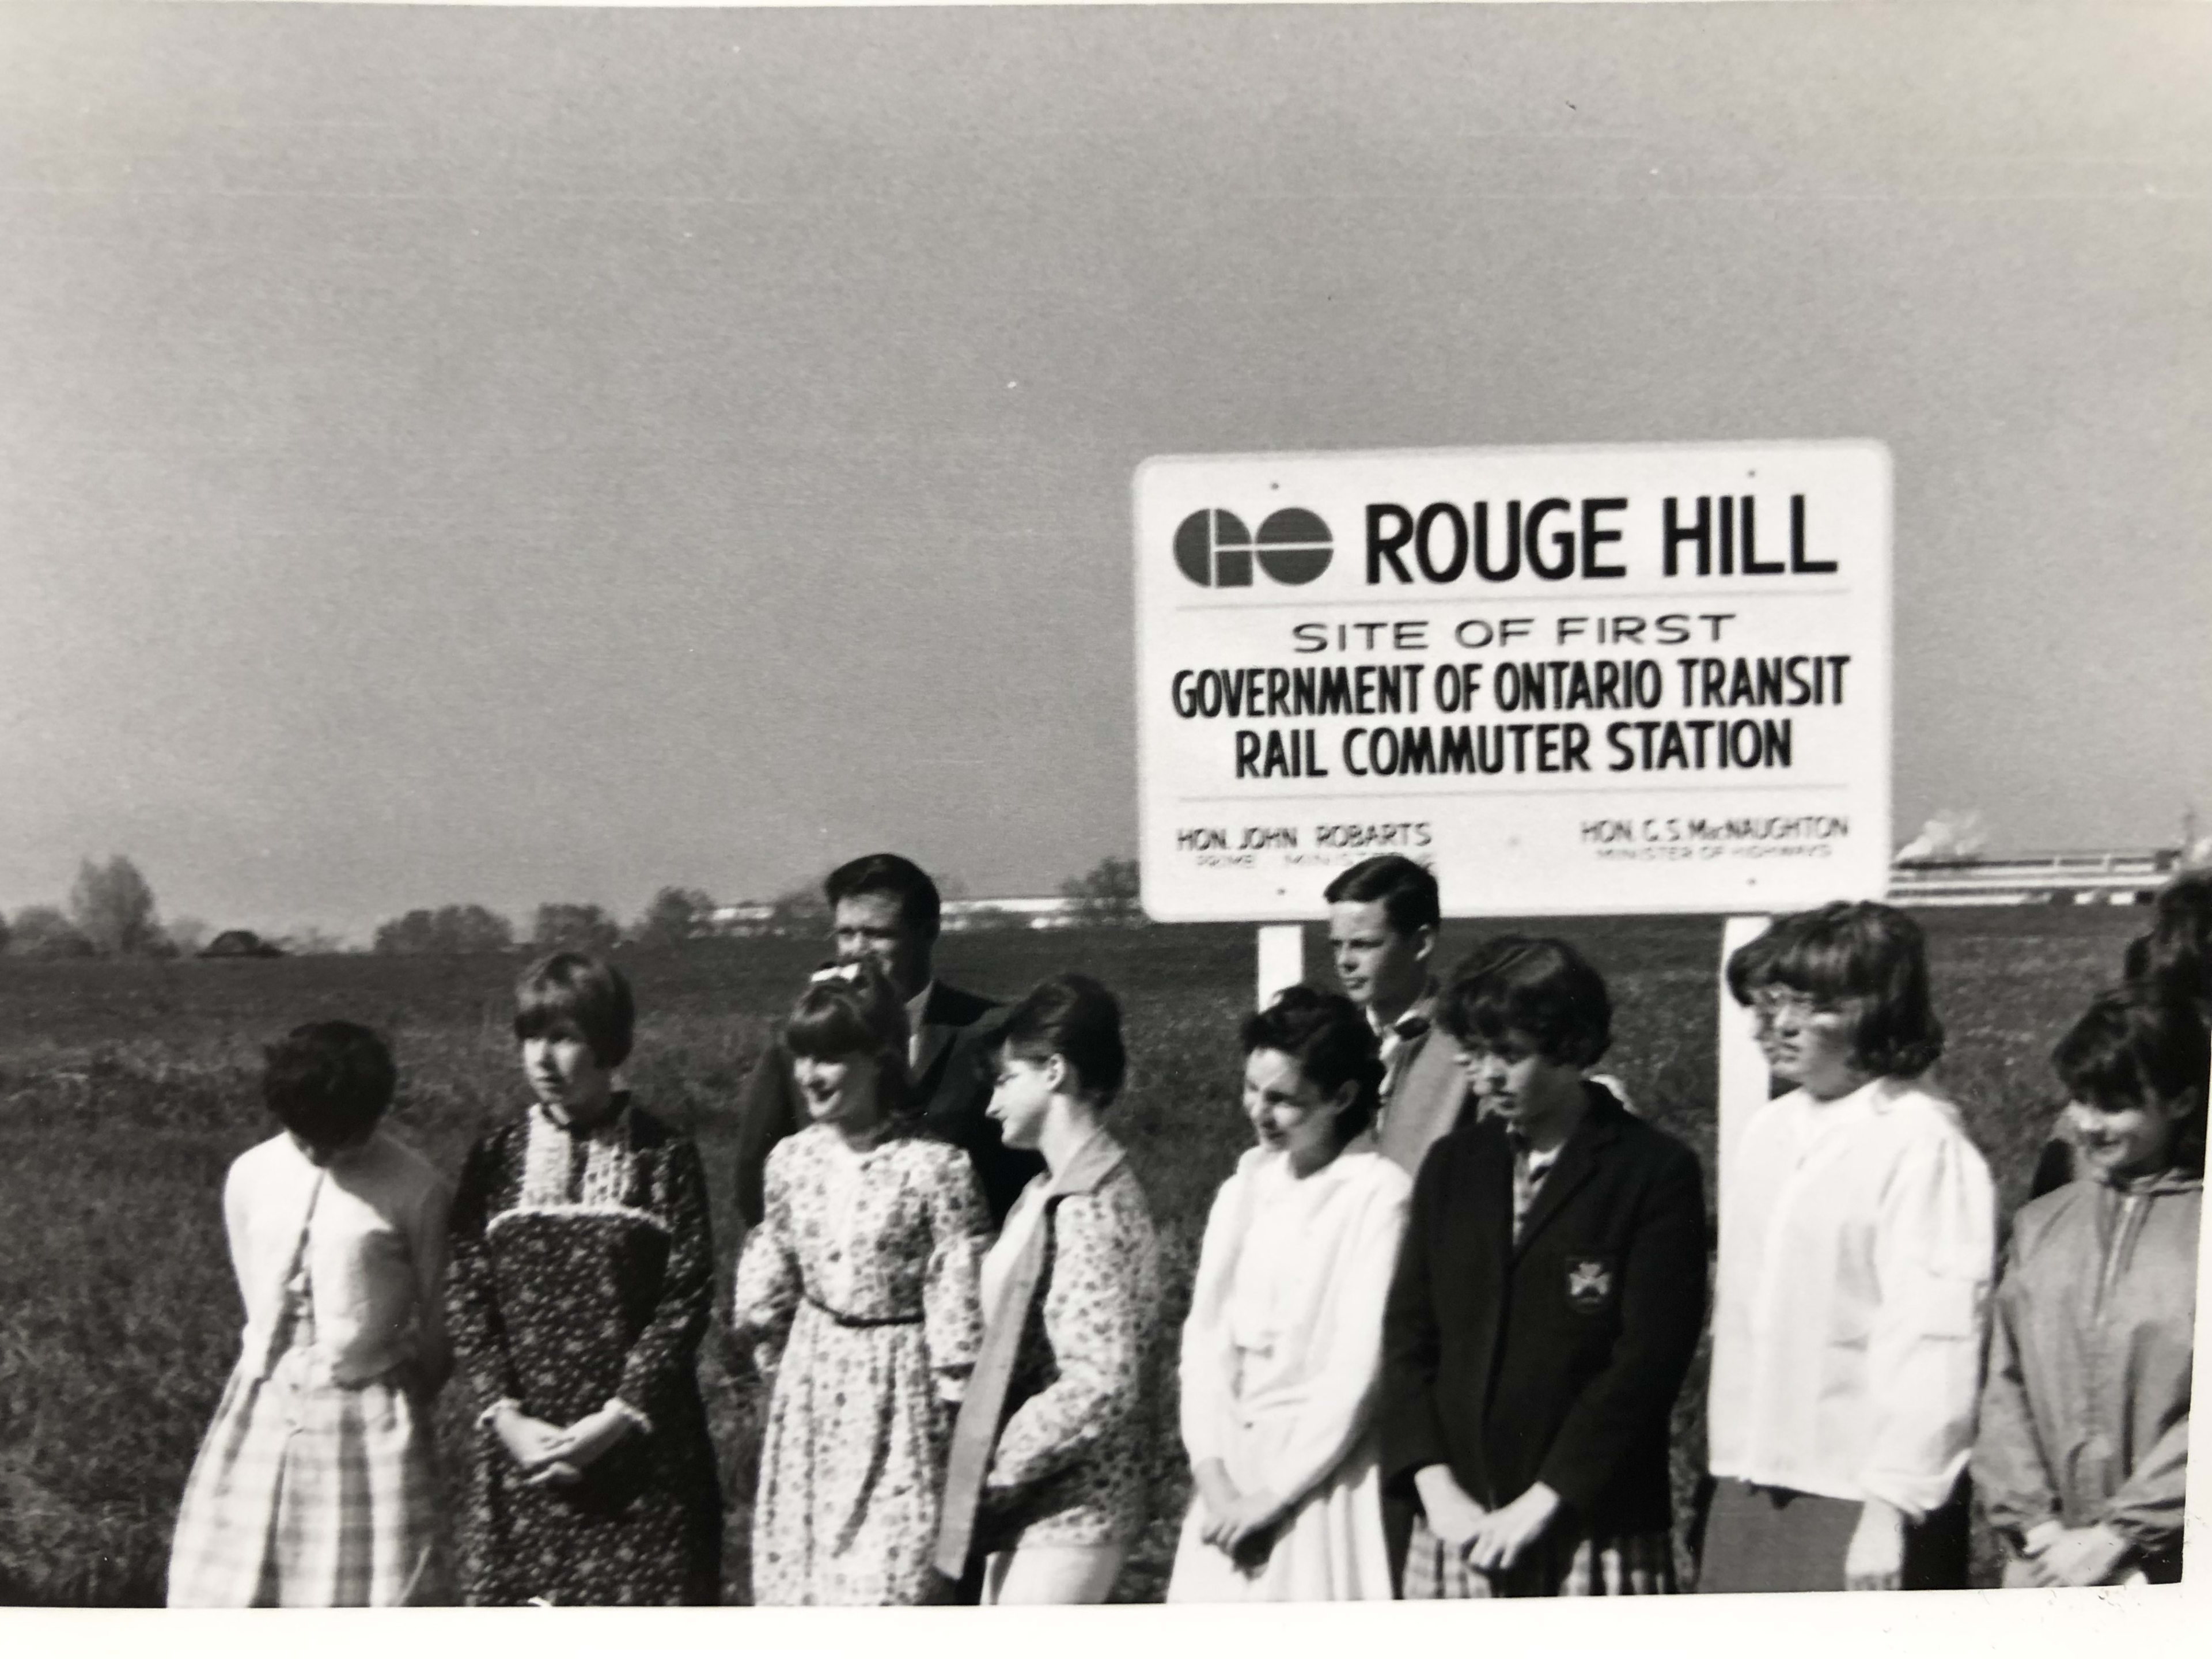 Students stand in front of a large sign promoting the Rouge Hill site.